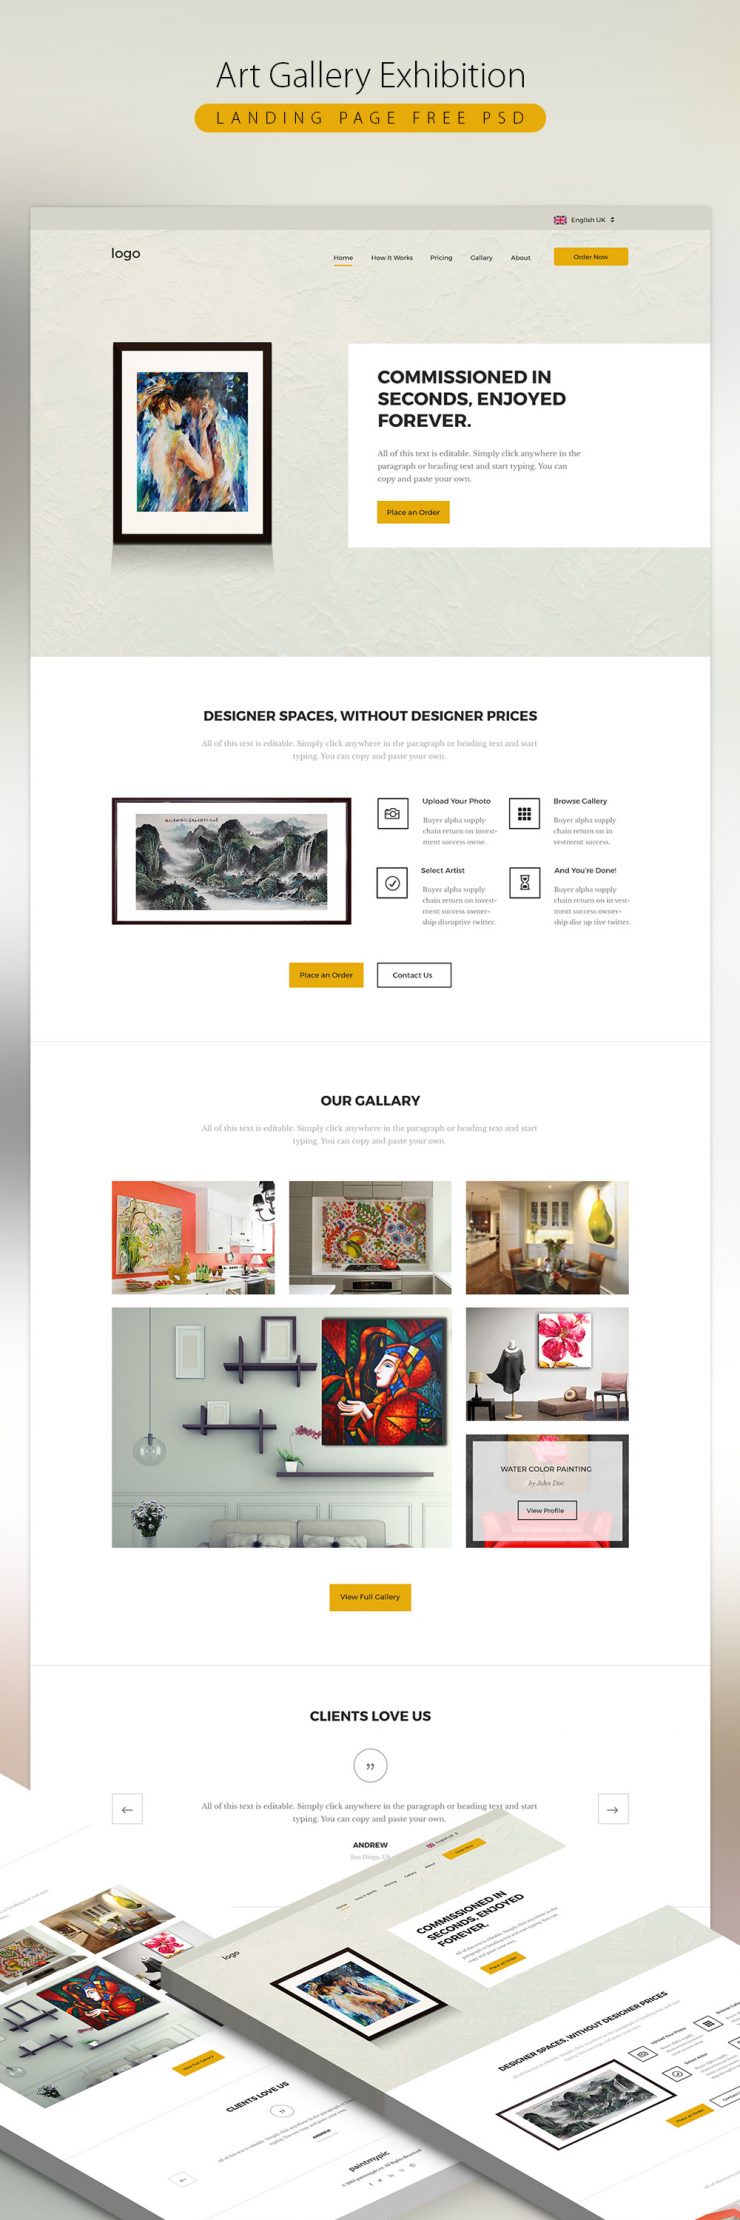 Download Art Gallery Exhibition Landing page Free PSD Download ...